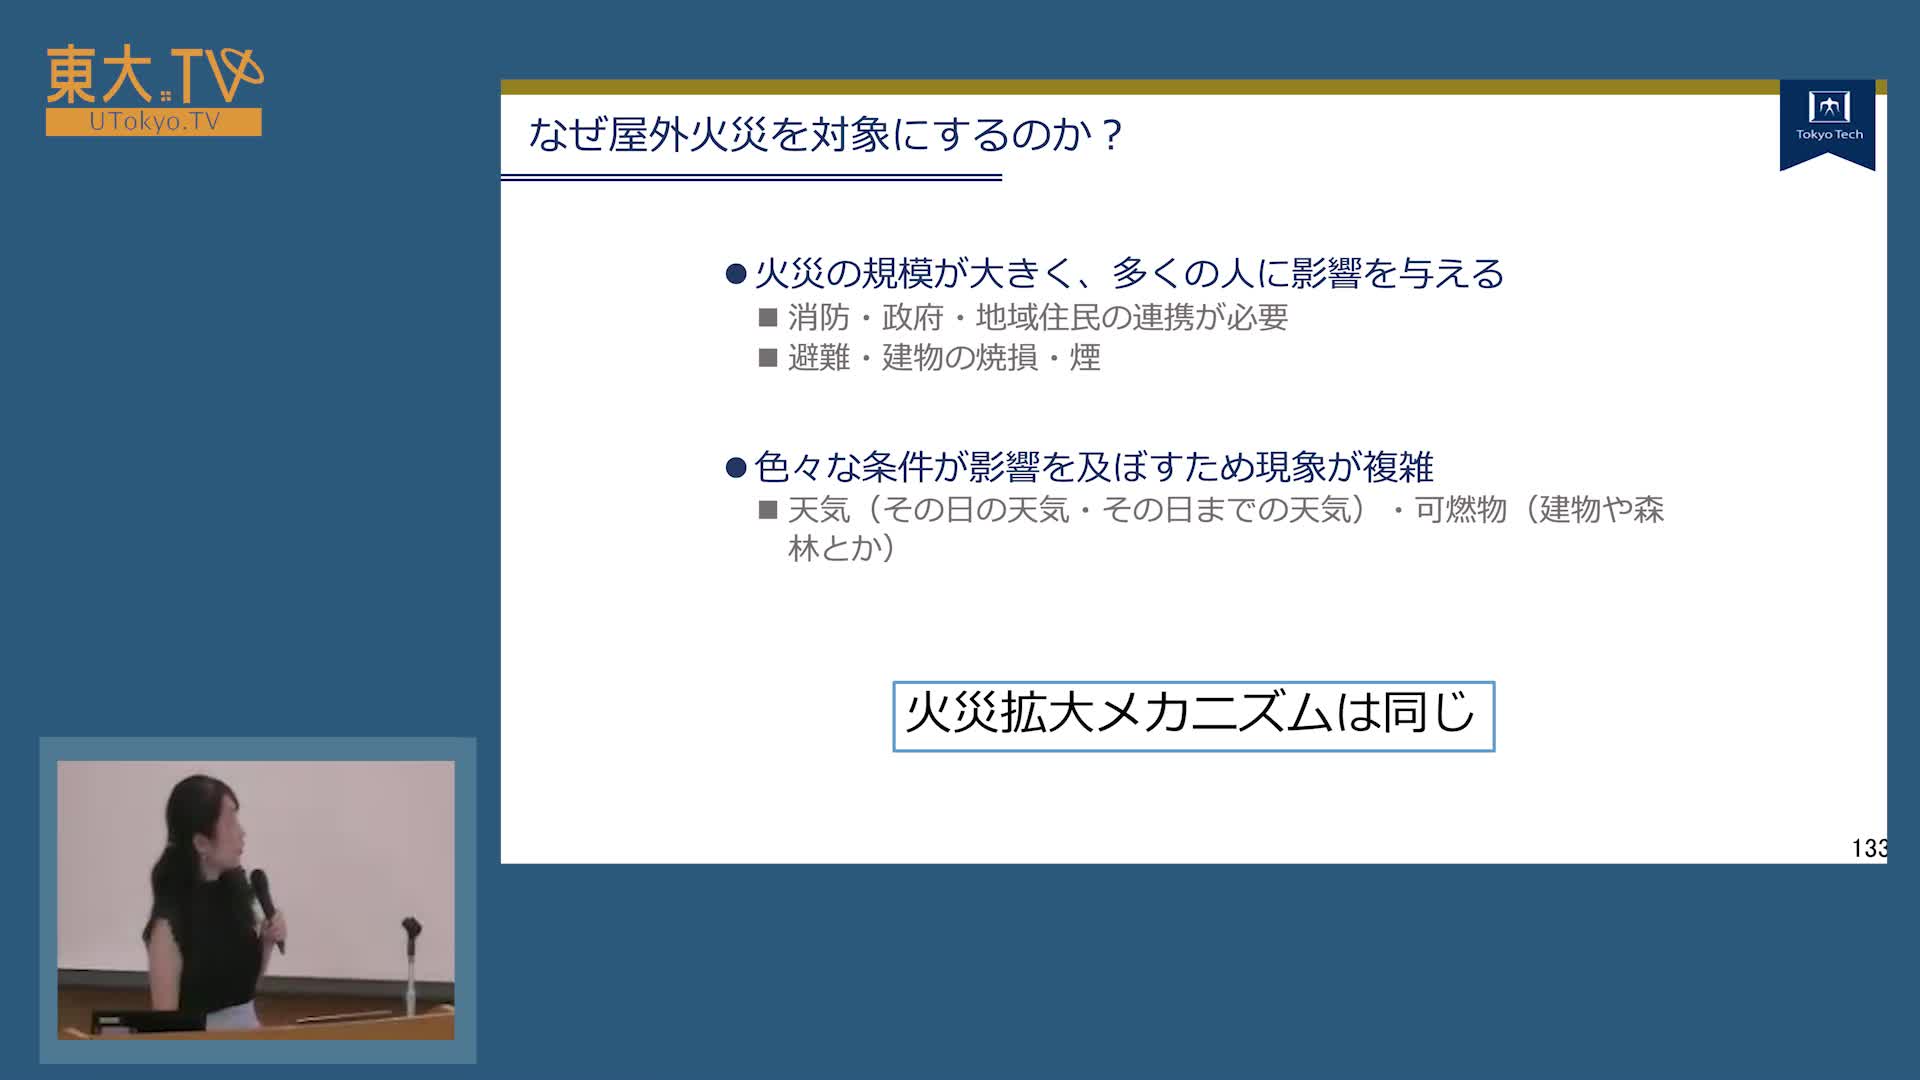 Preparing for the Risk of Fire Spreading, Closing Address [JP]